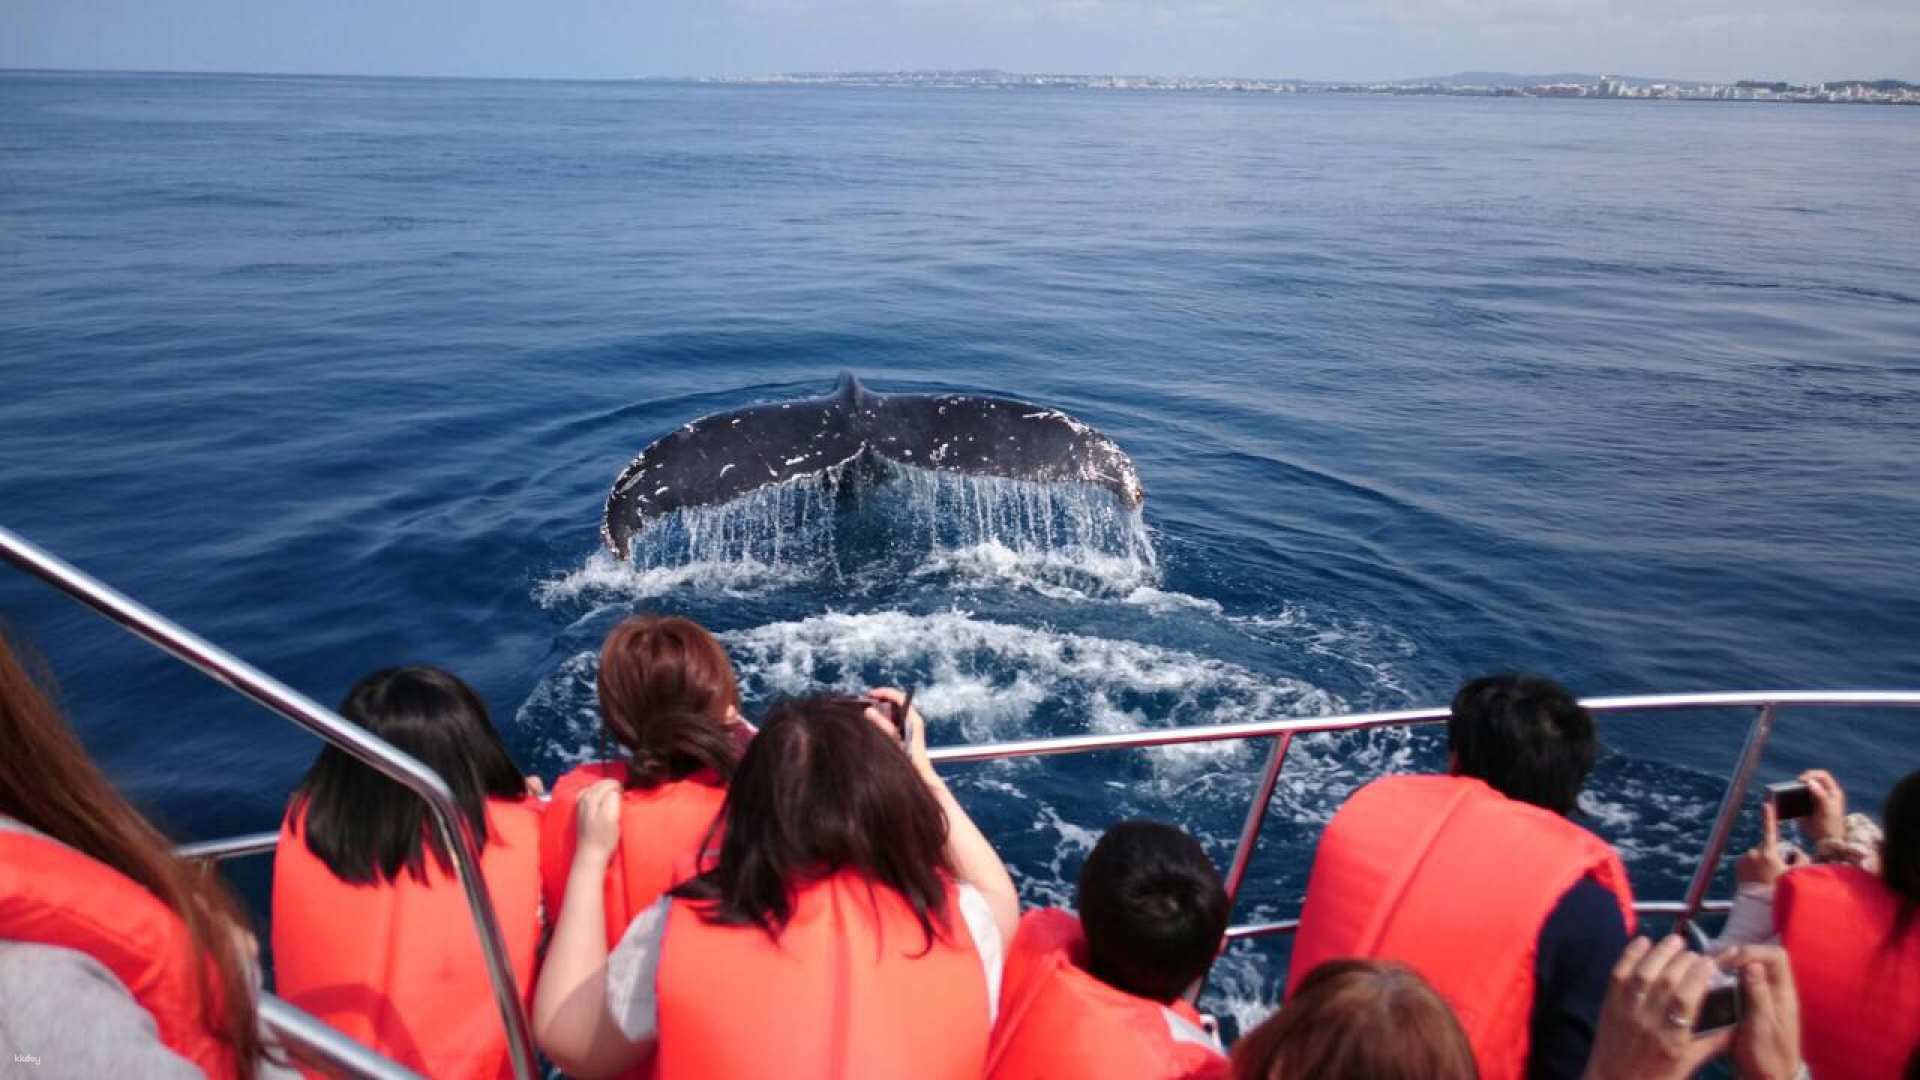 Okinawa, Japan｜Whale Watching Experience in Winter｜Departure from Chatan American Village (Go by yourself)